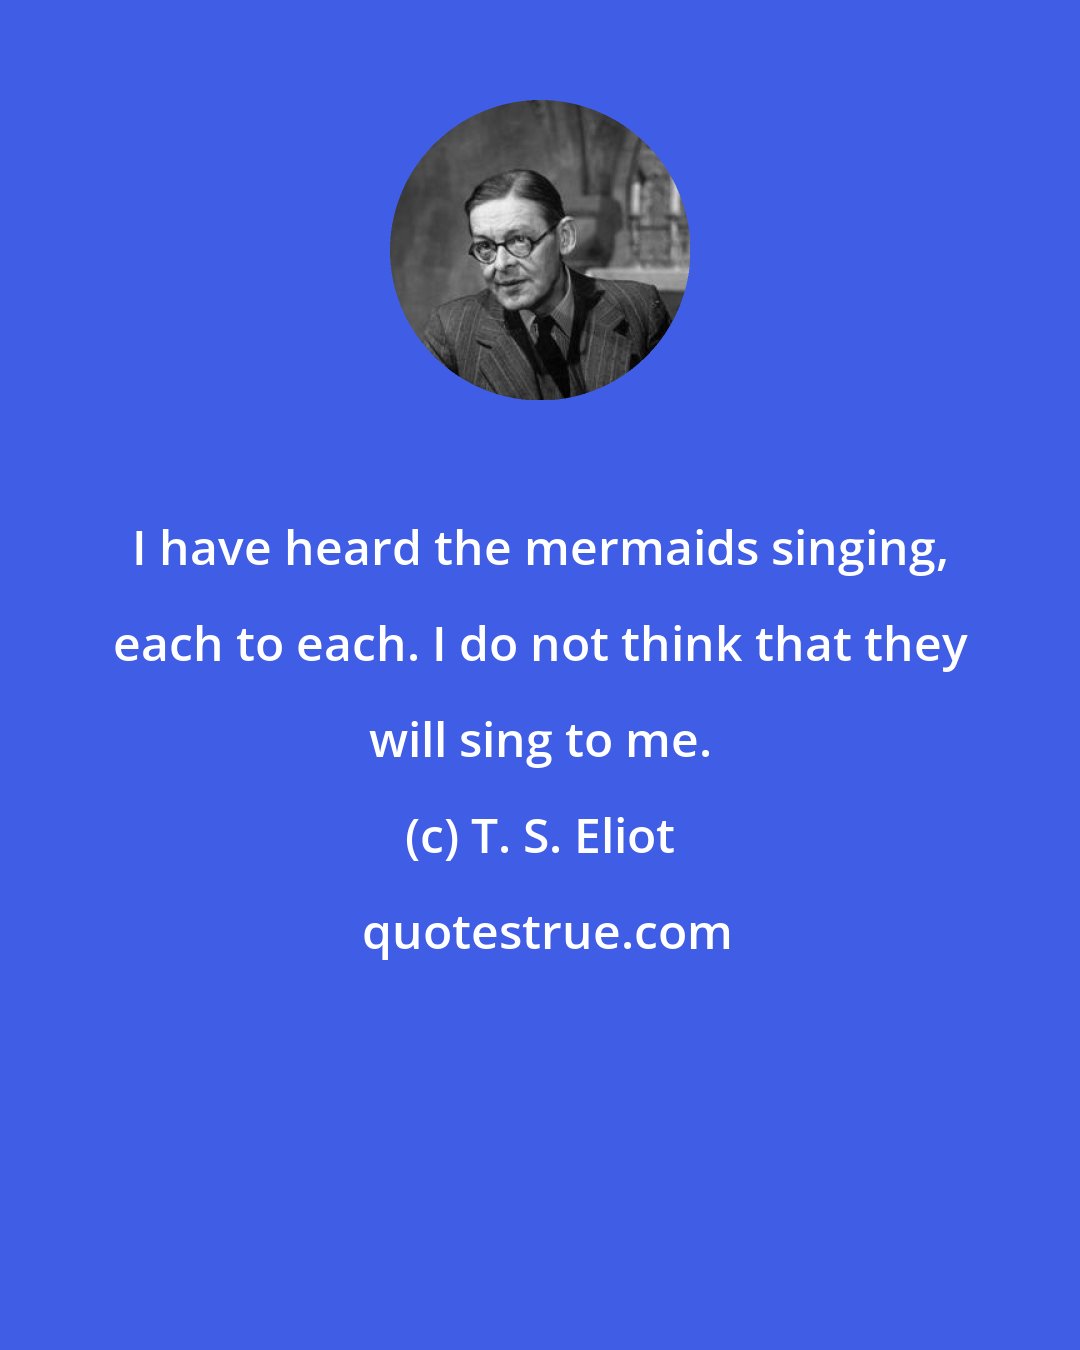 T. S. Eliot: I have heard the mermaids singing, each to each. I do not think that they will sing to me.